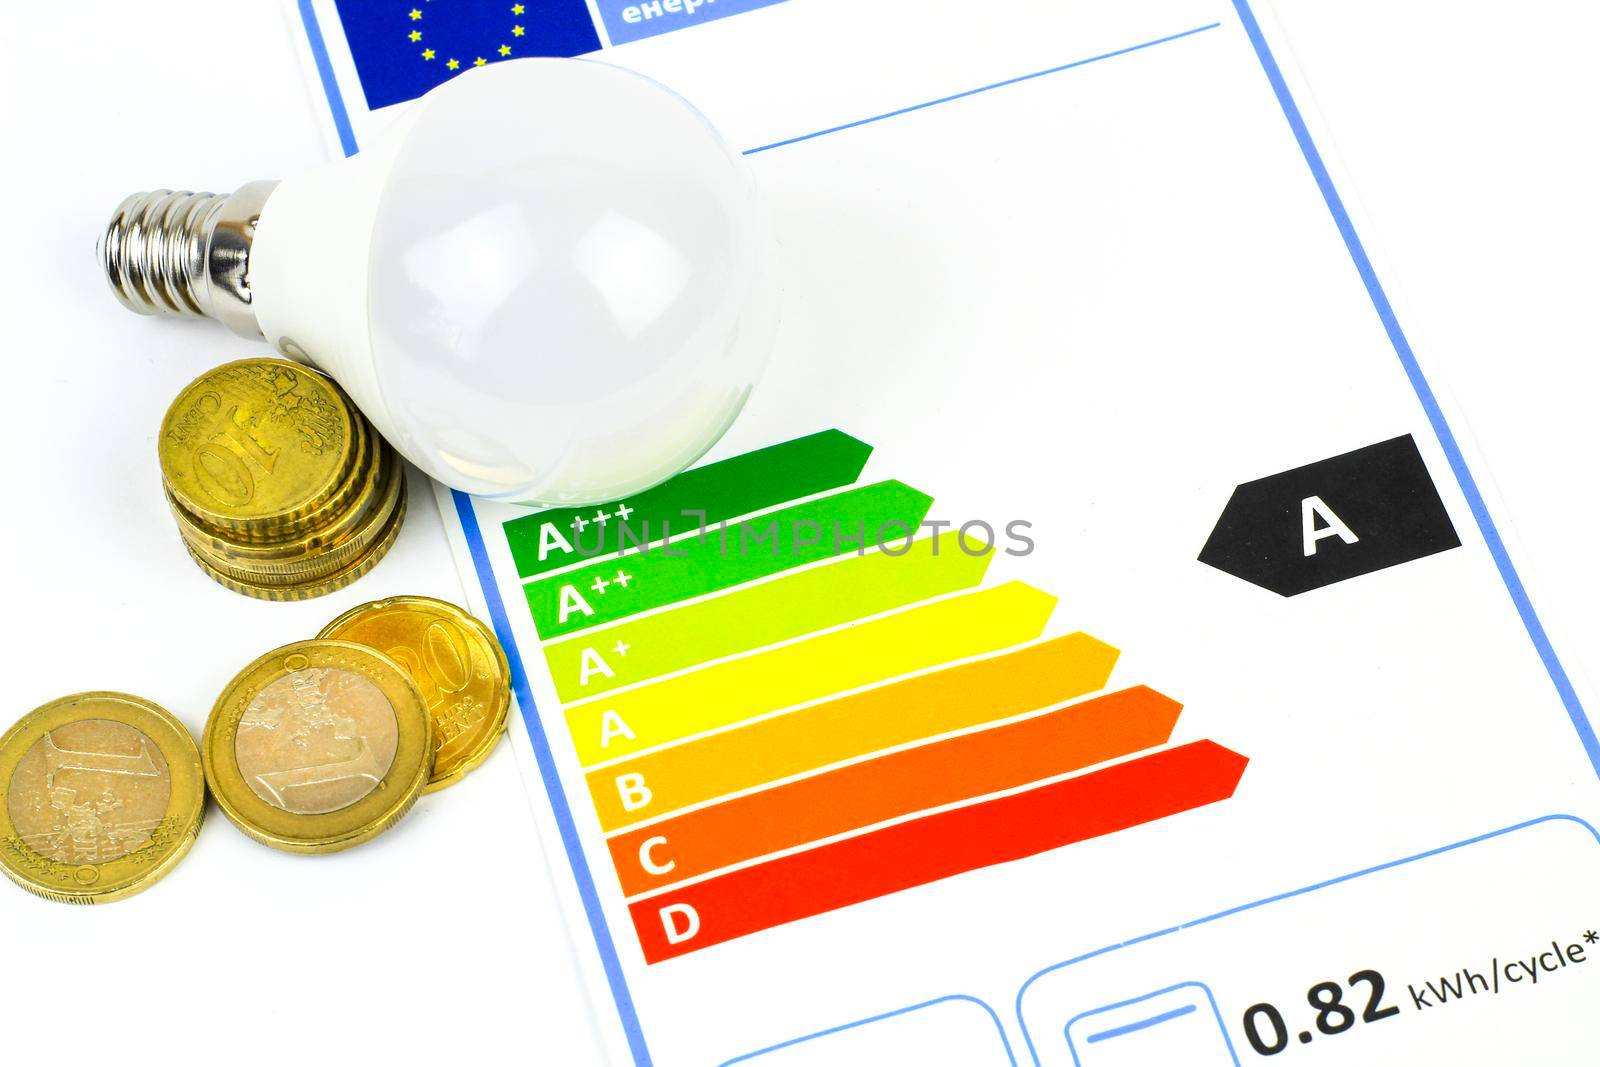 European Union Energy Label next to coins and led light bulb by soniabonet